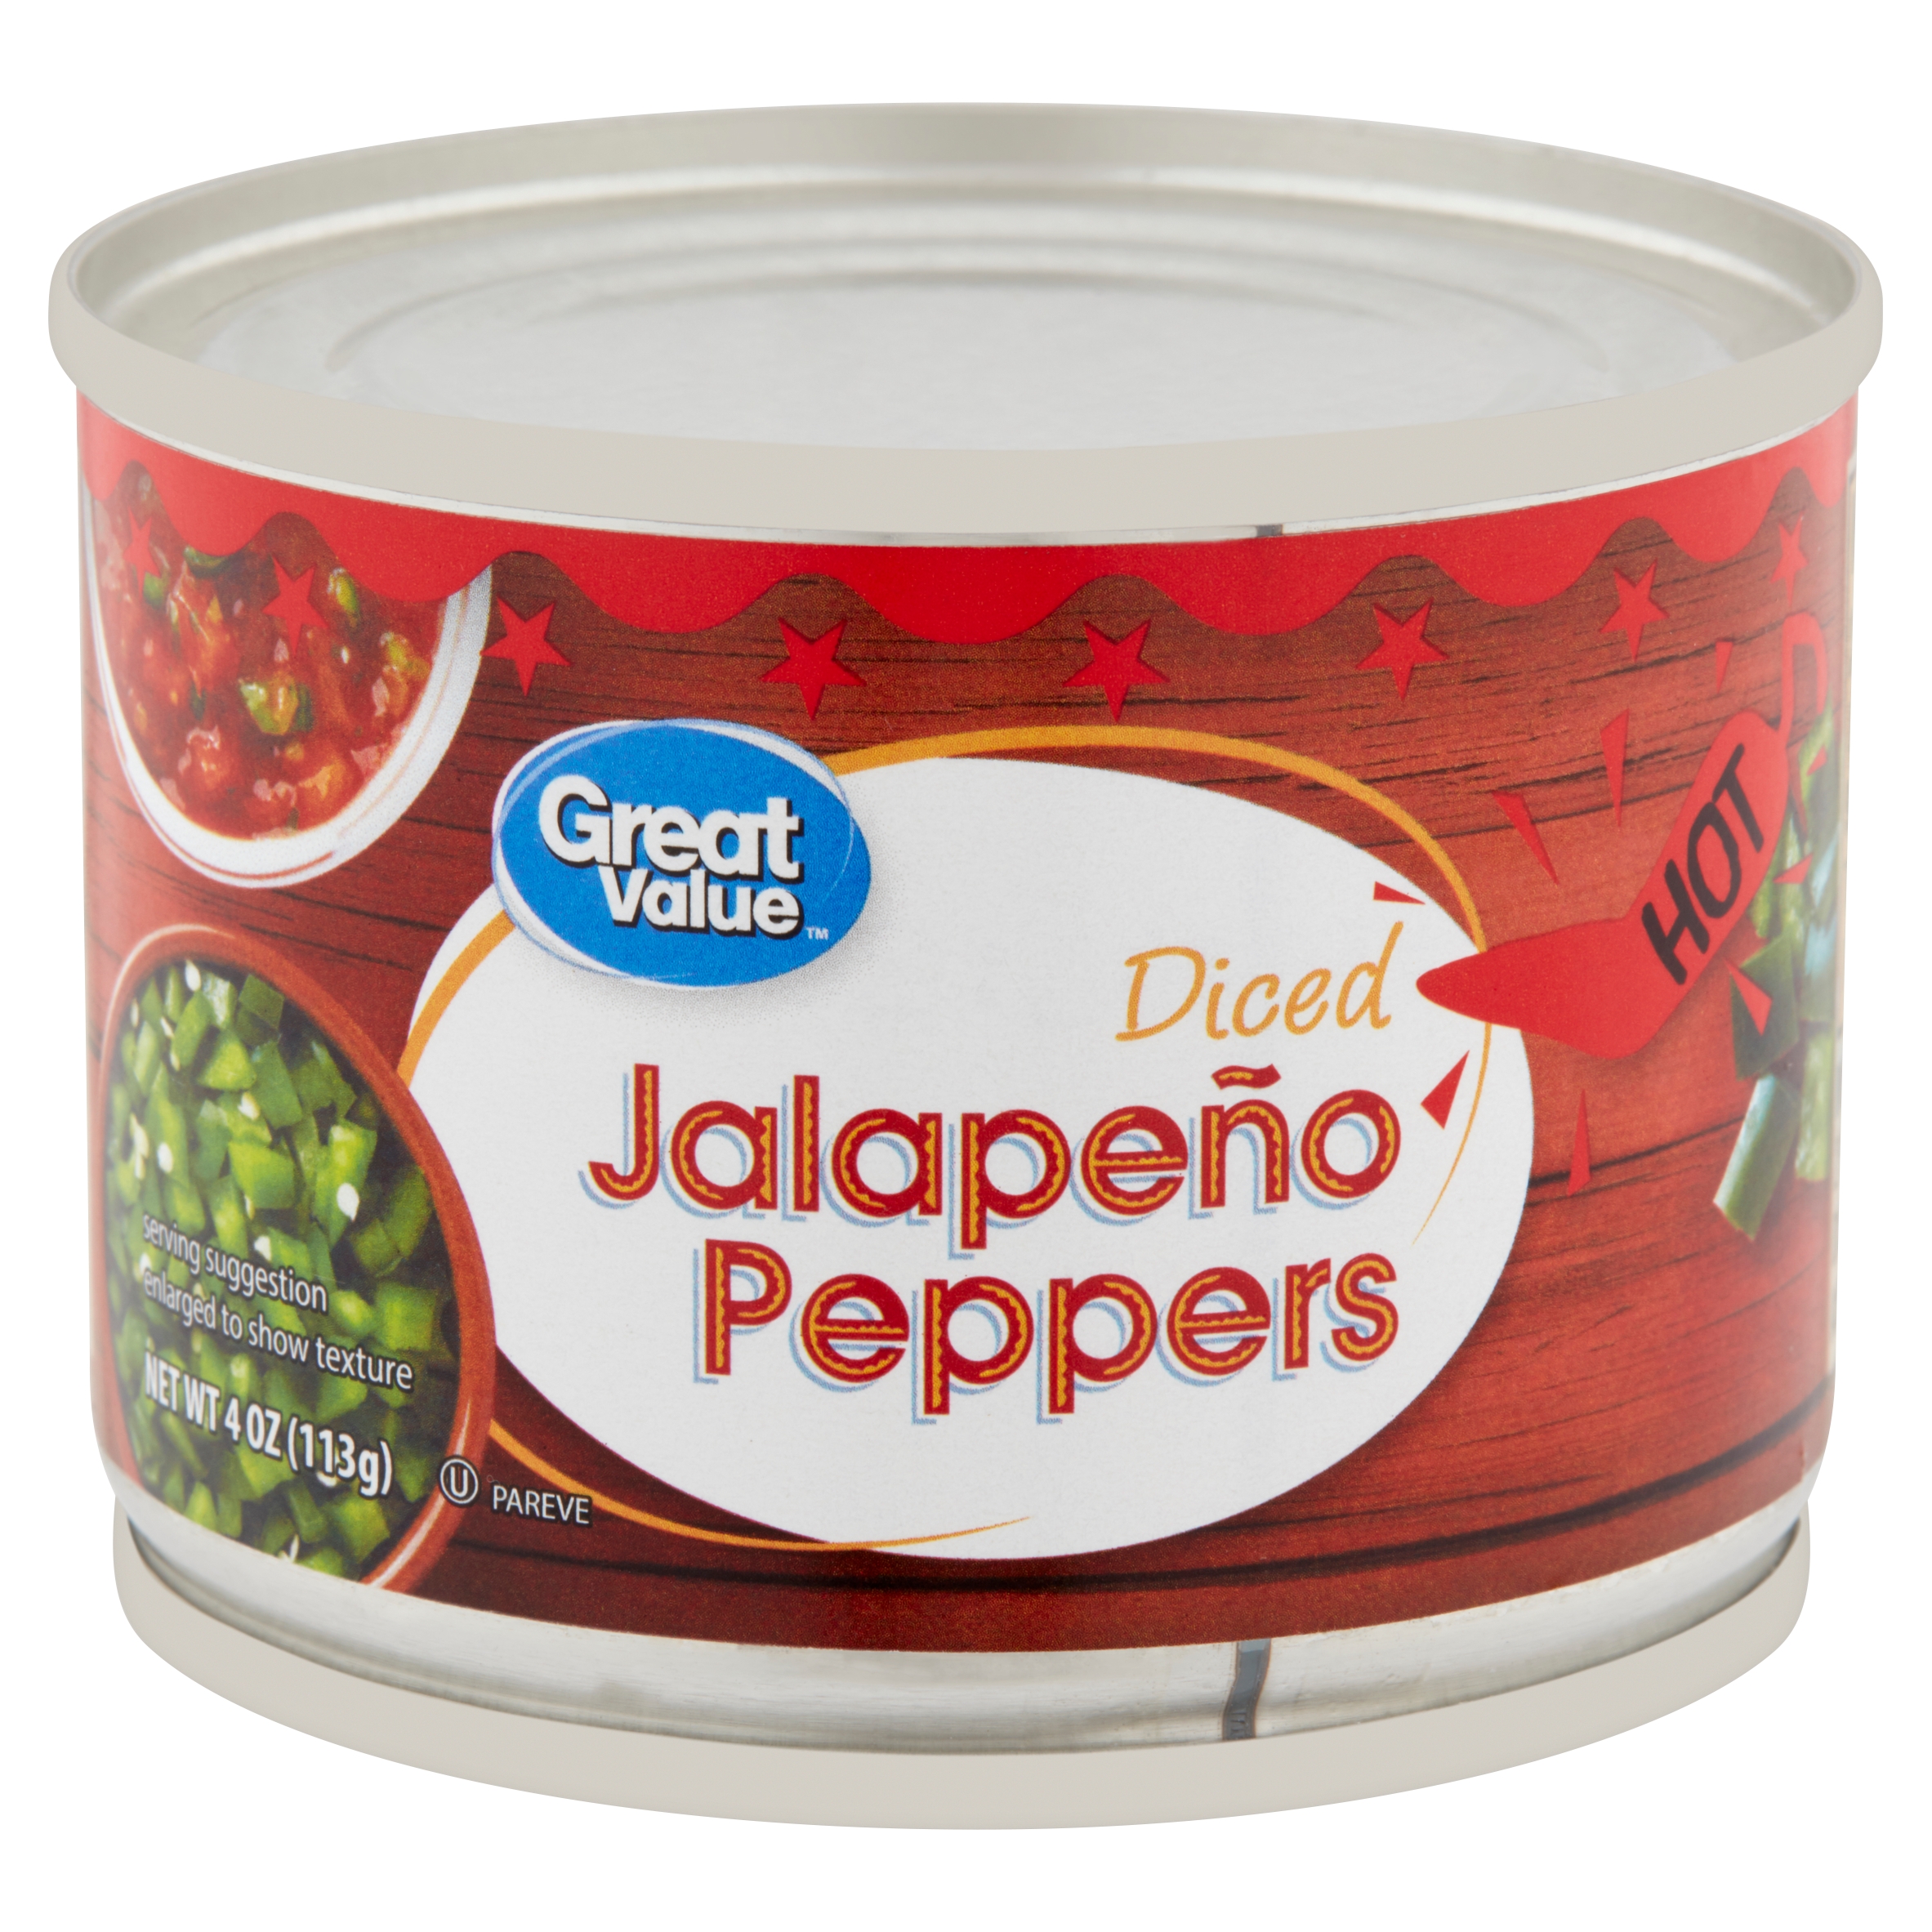 Great Value Hot Diced Jalapeno Peppers, 4 Oz Image